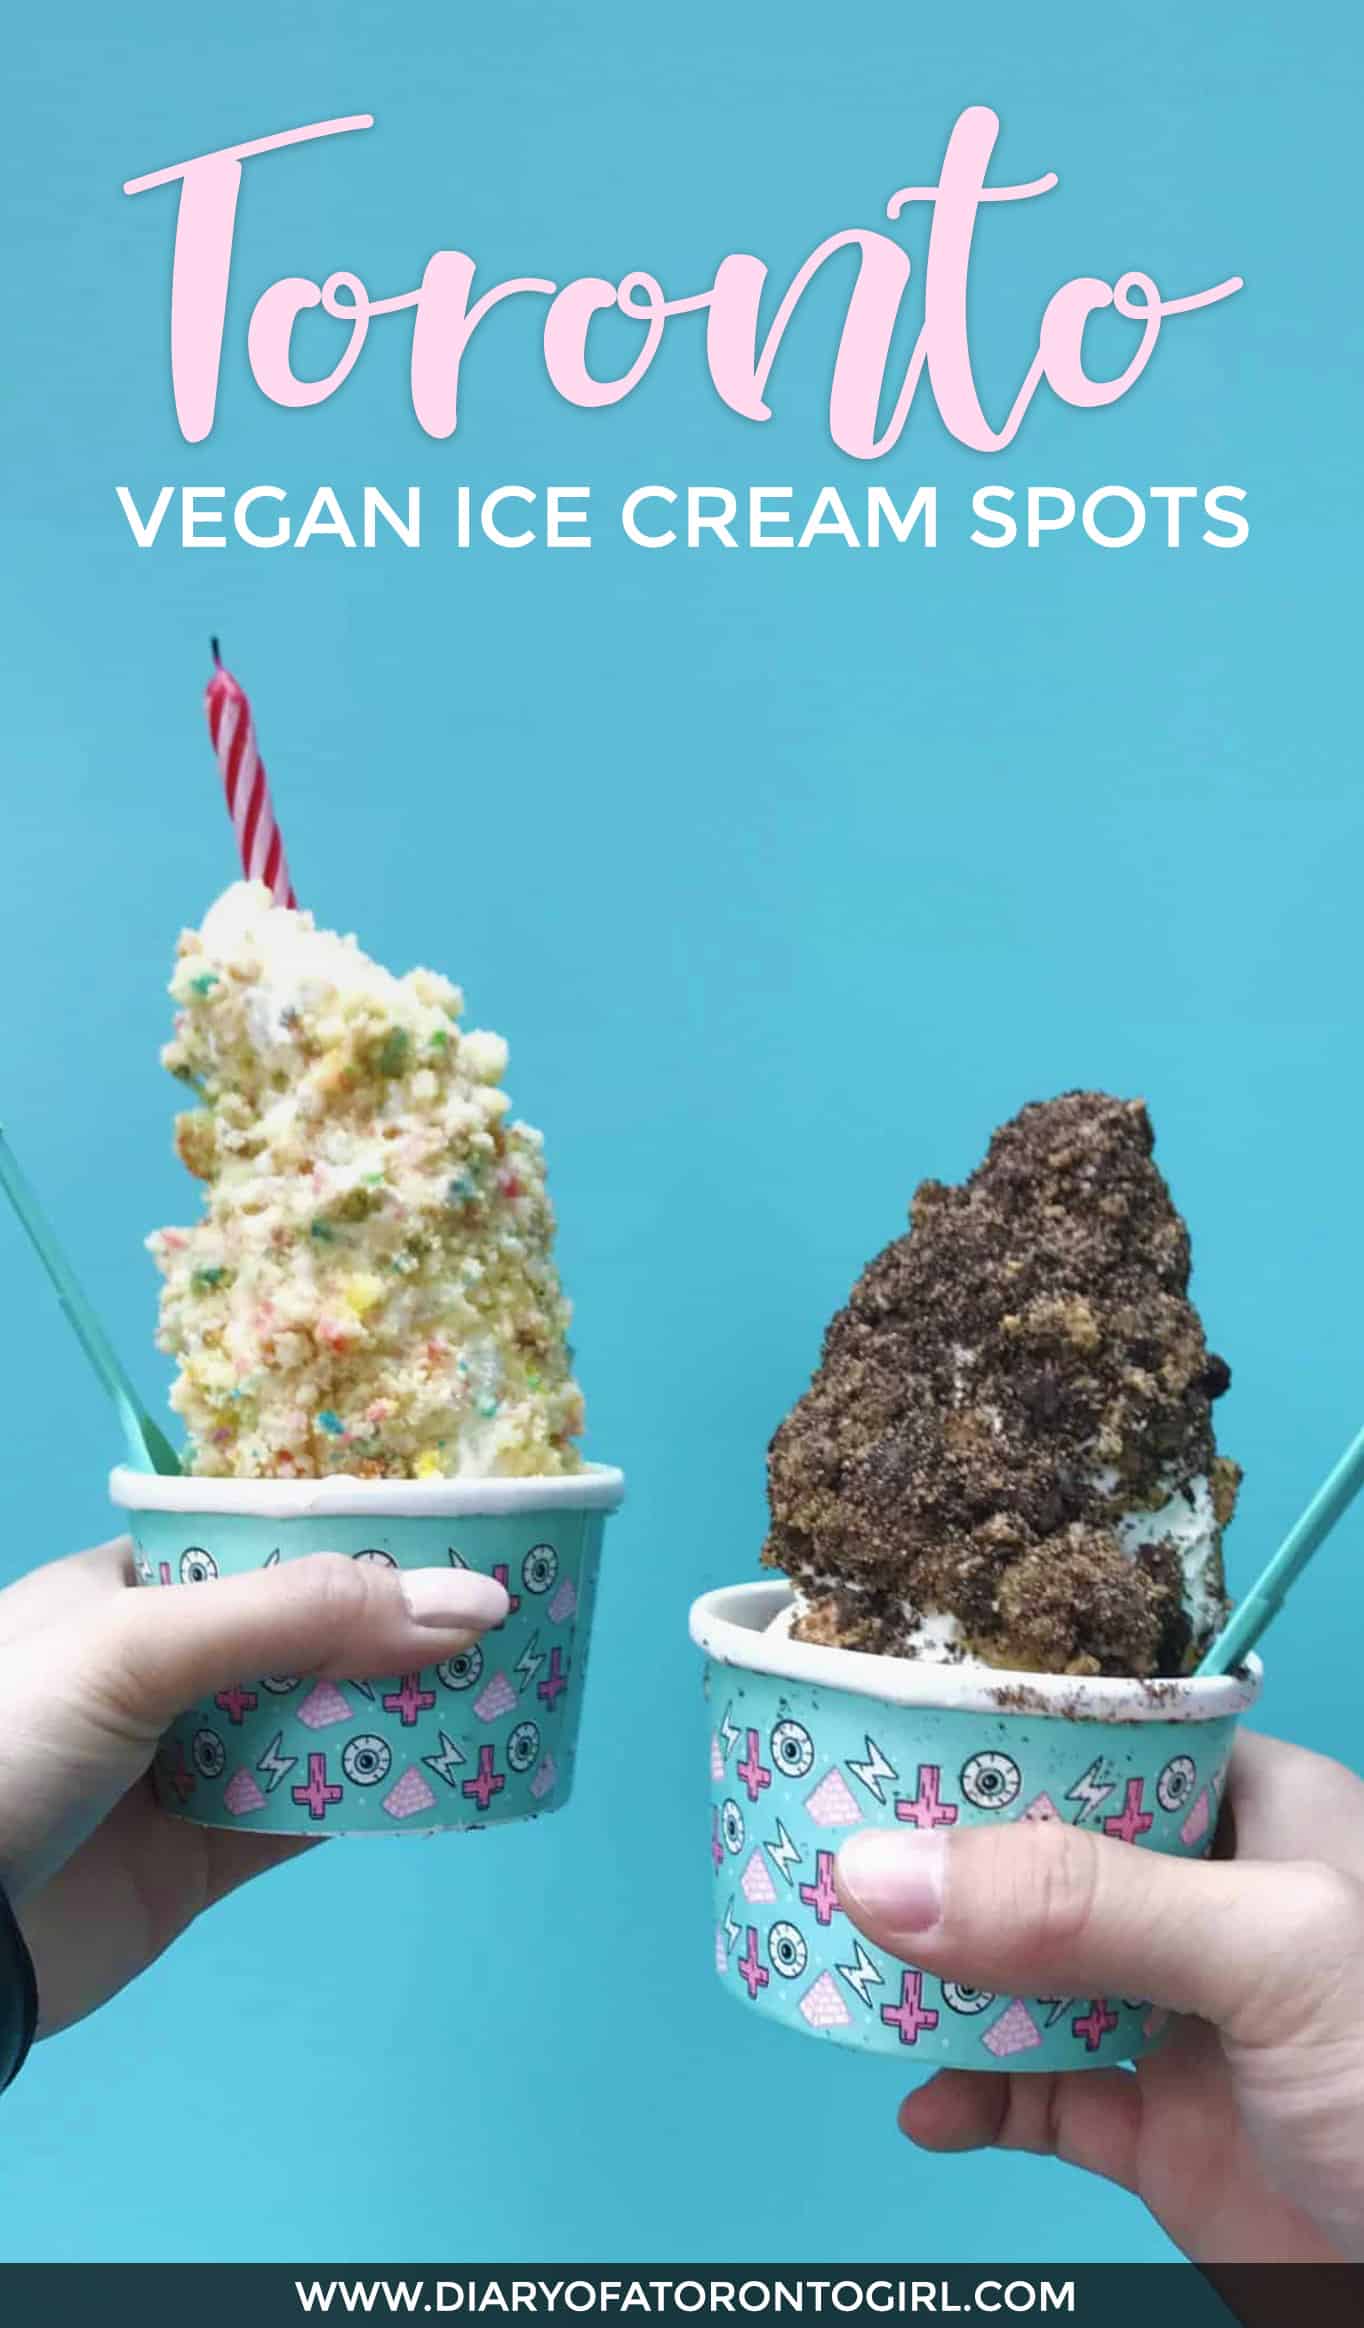 Looking for non-dairy options to eat in Toronto? Here are some of the best vegan ice cream and gelato spots to visit during your trip to Toronto, Canada!